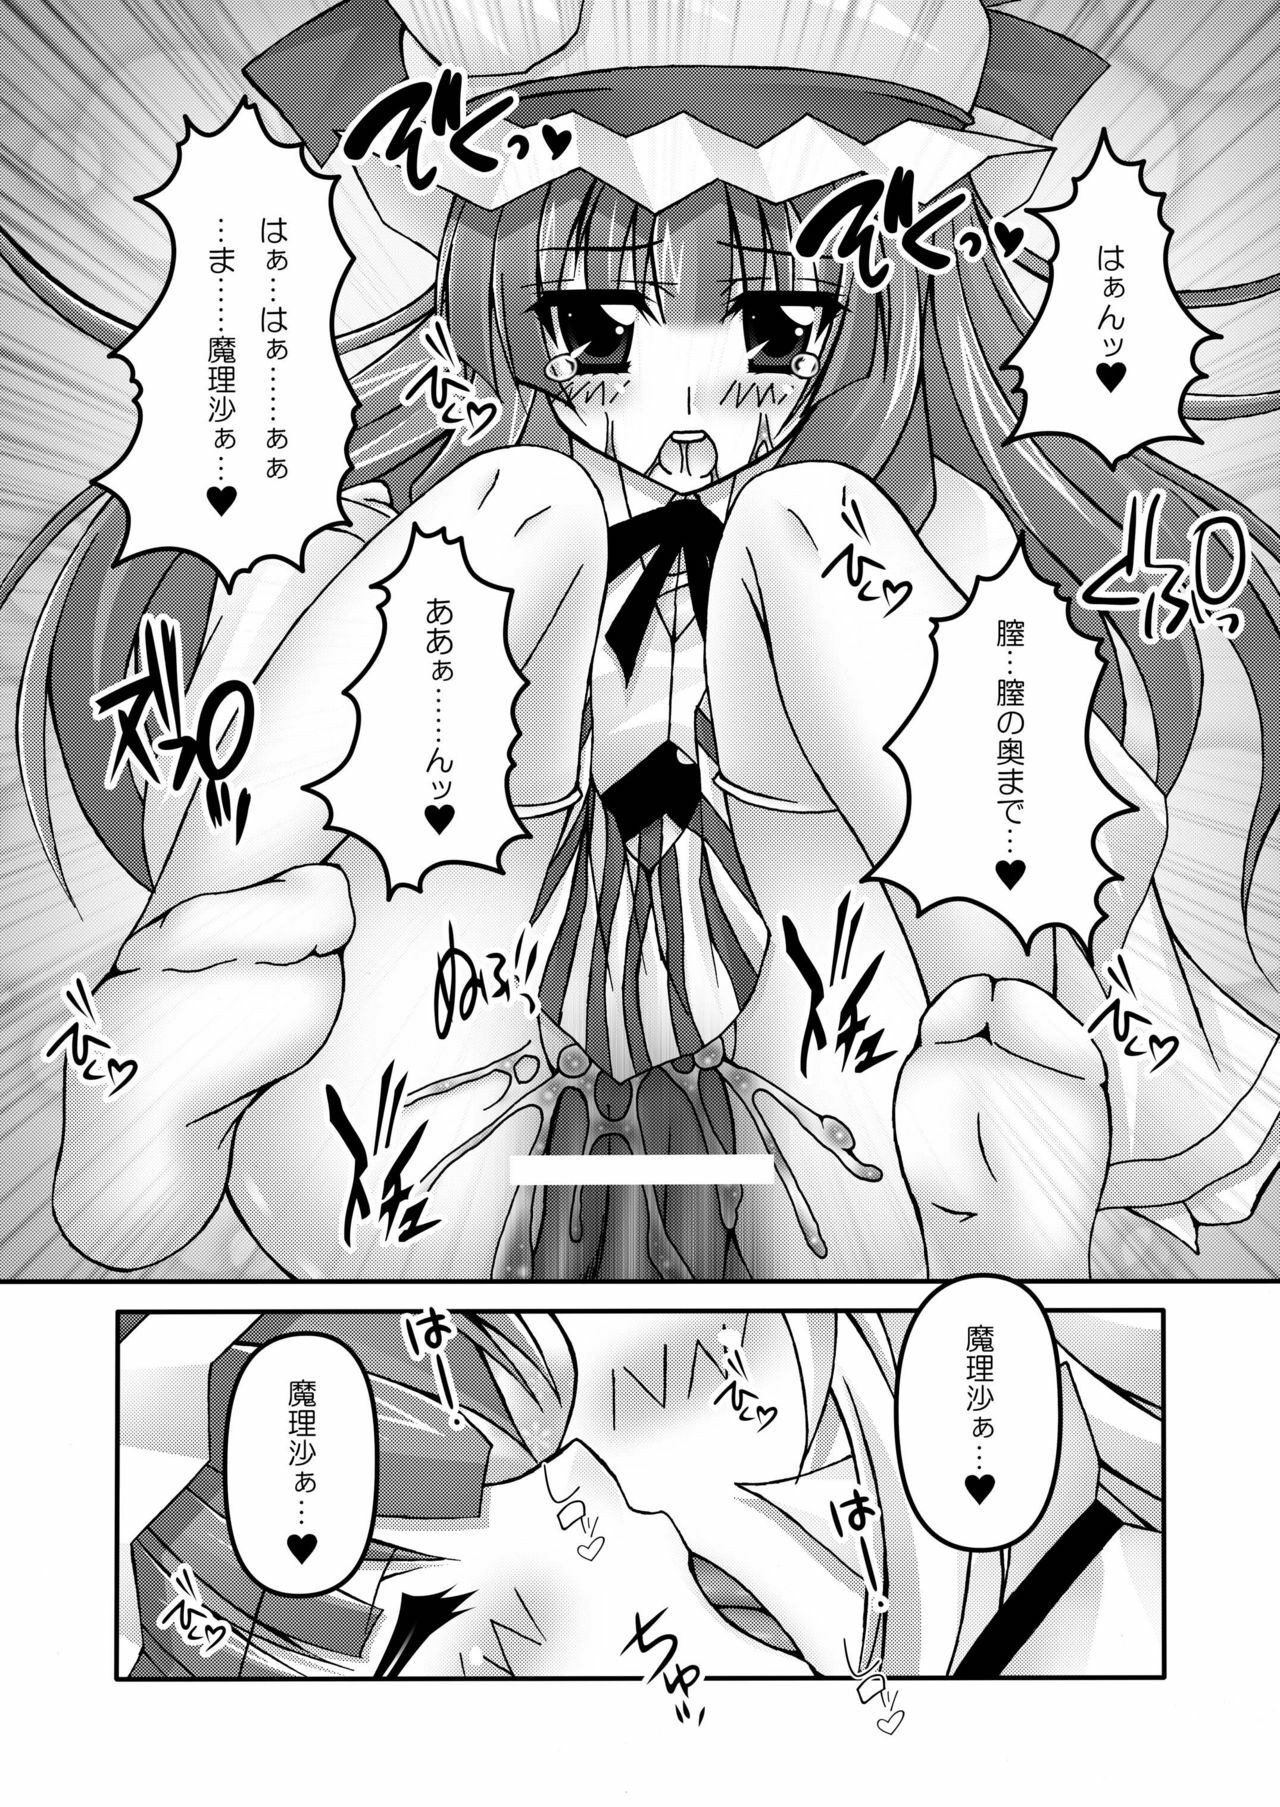 [Chronicle (YUKITO)] Only my wizard (Touhou Project) [Digital] page 38 full